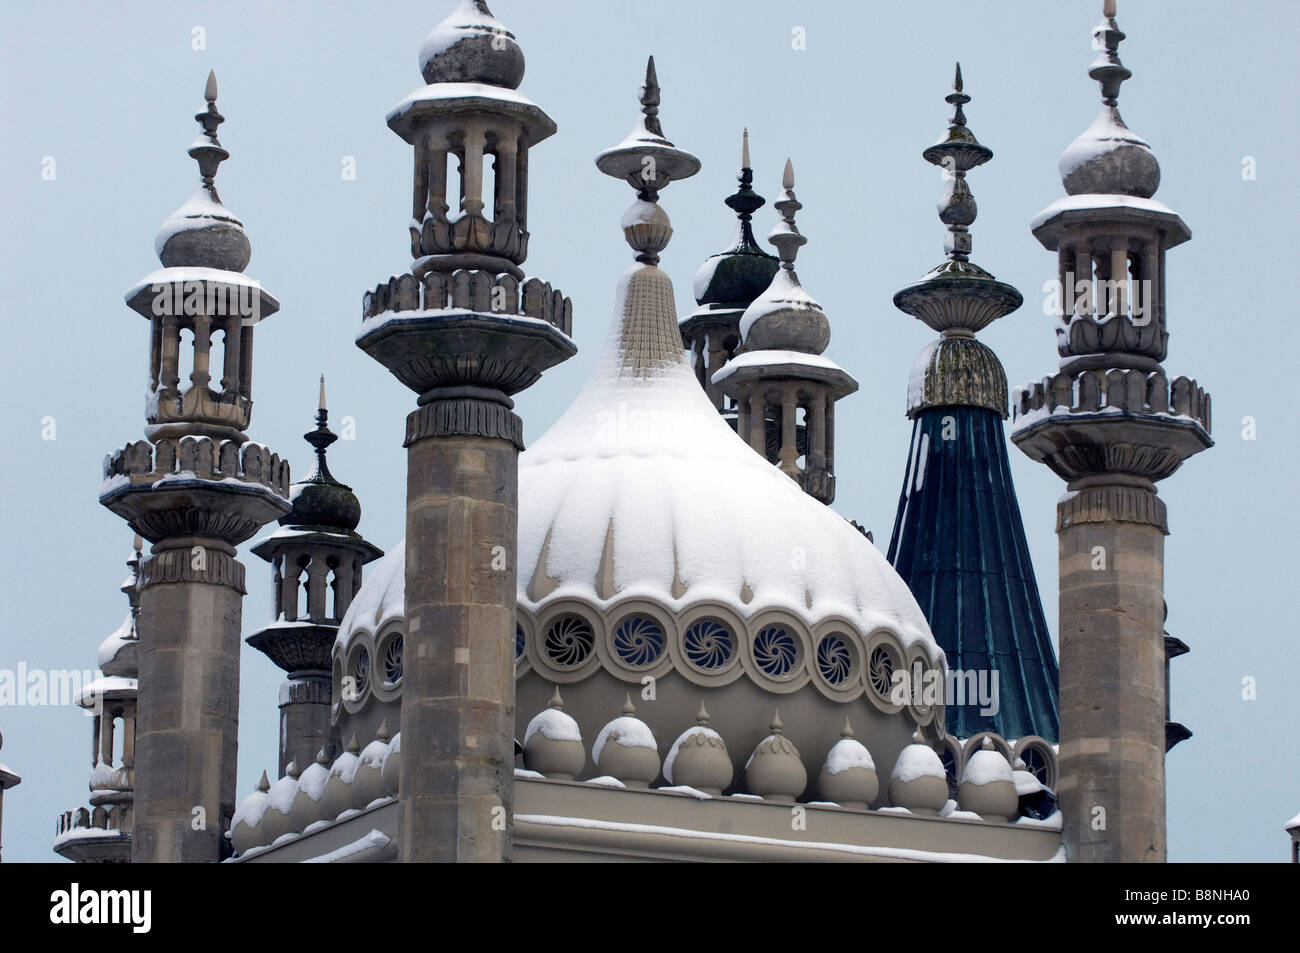 Snow covers the Domes and minarets of the Brighton Royal Pavilion East Sussex UK Stock Photo